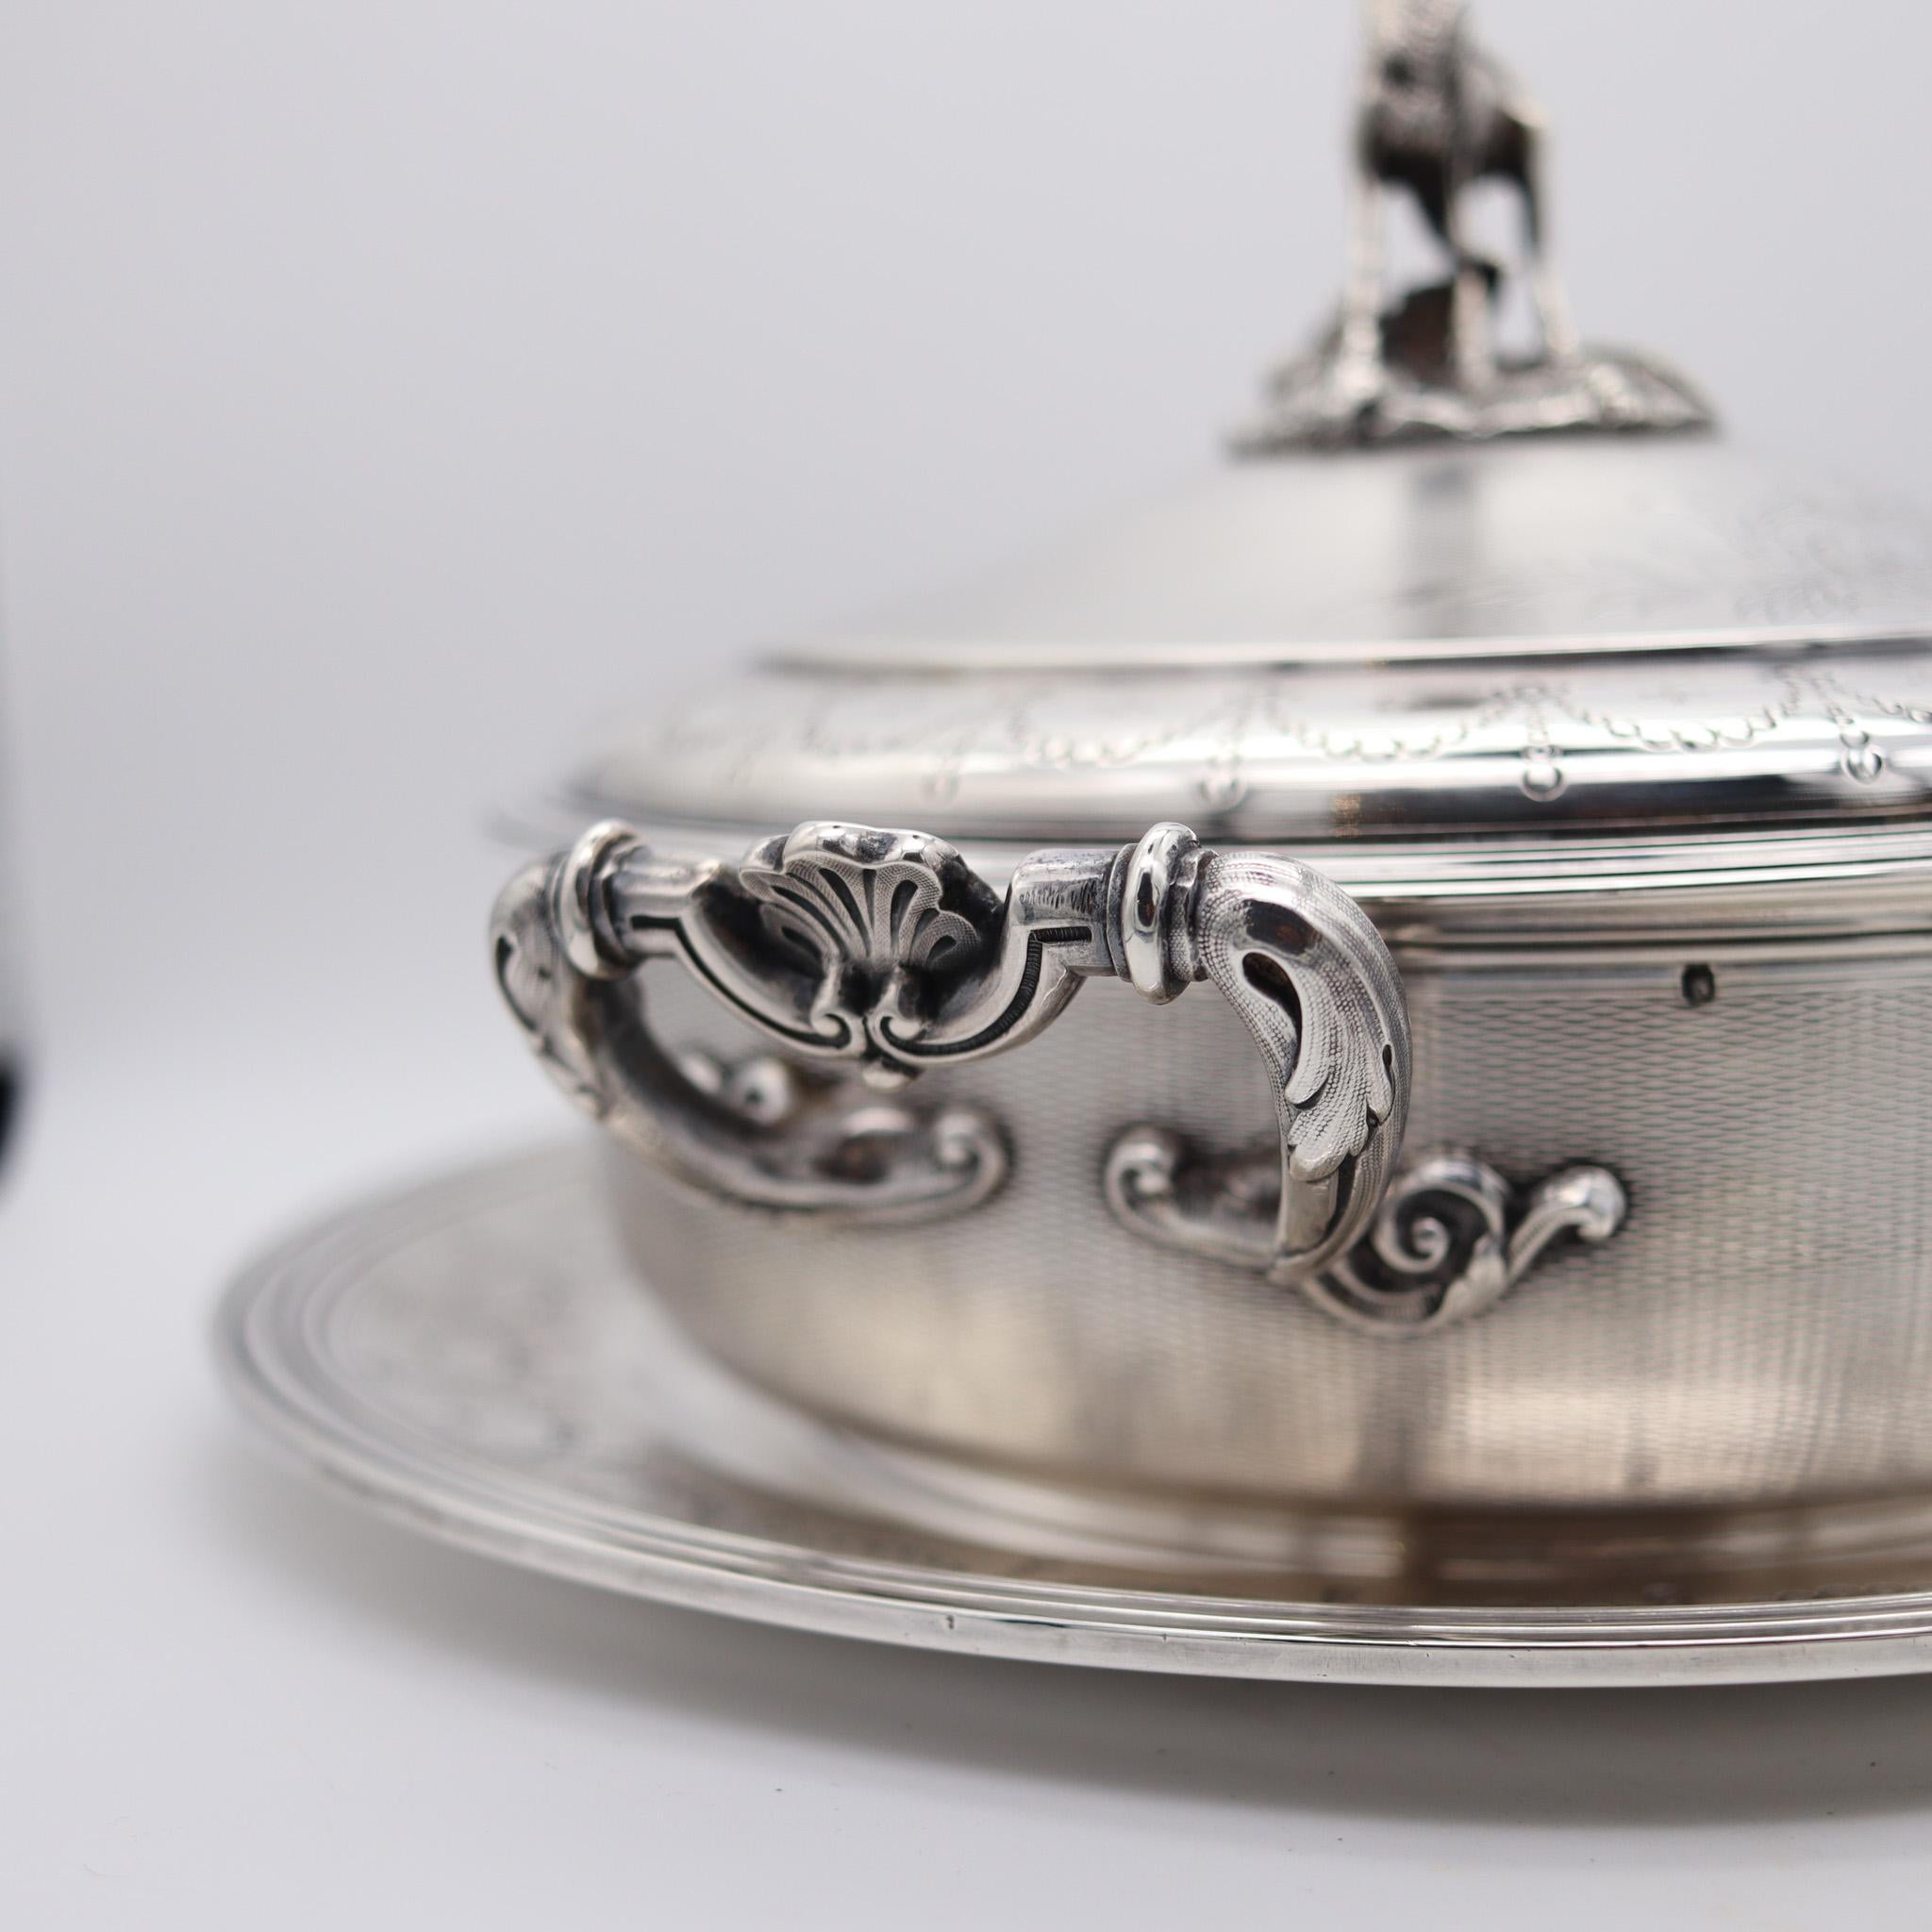 Tallois & Mayence 1885 Paris Covered Dish With Plate In .950 Sterling Silver For Sale 4